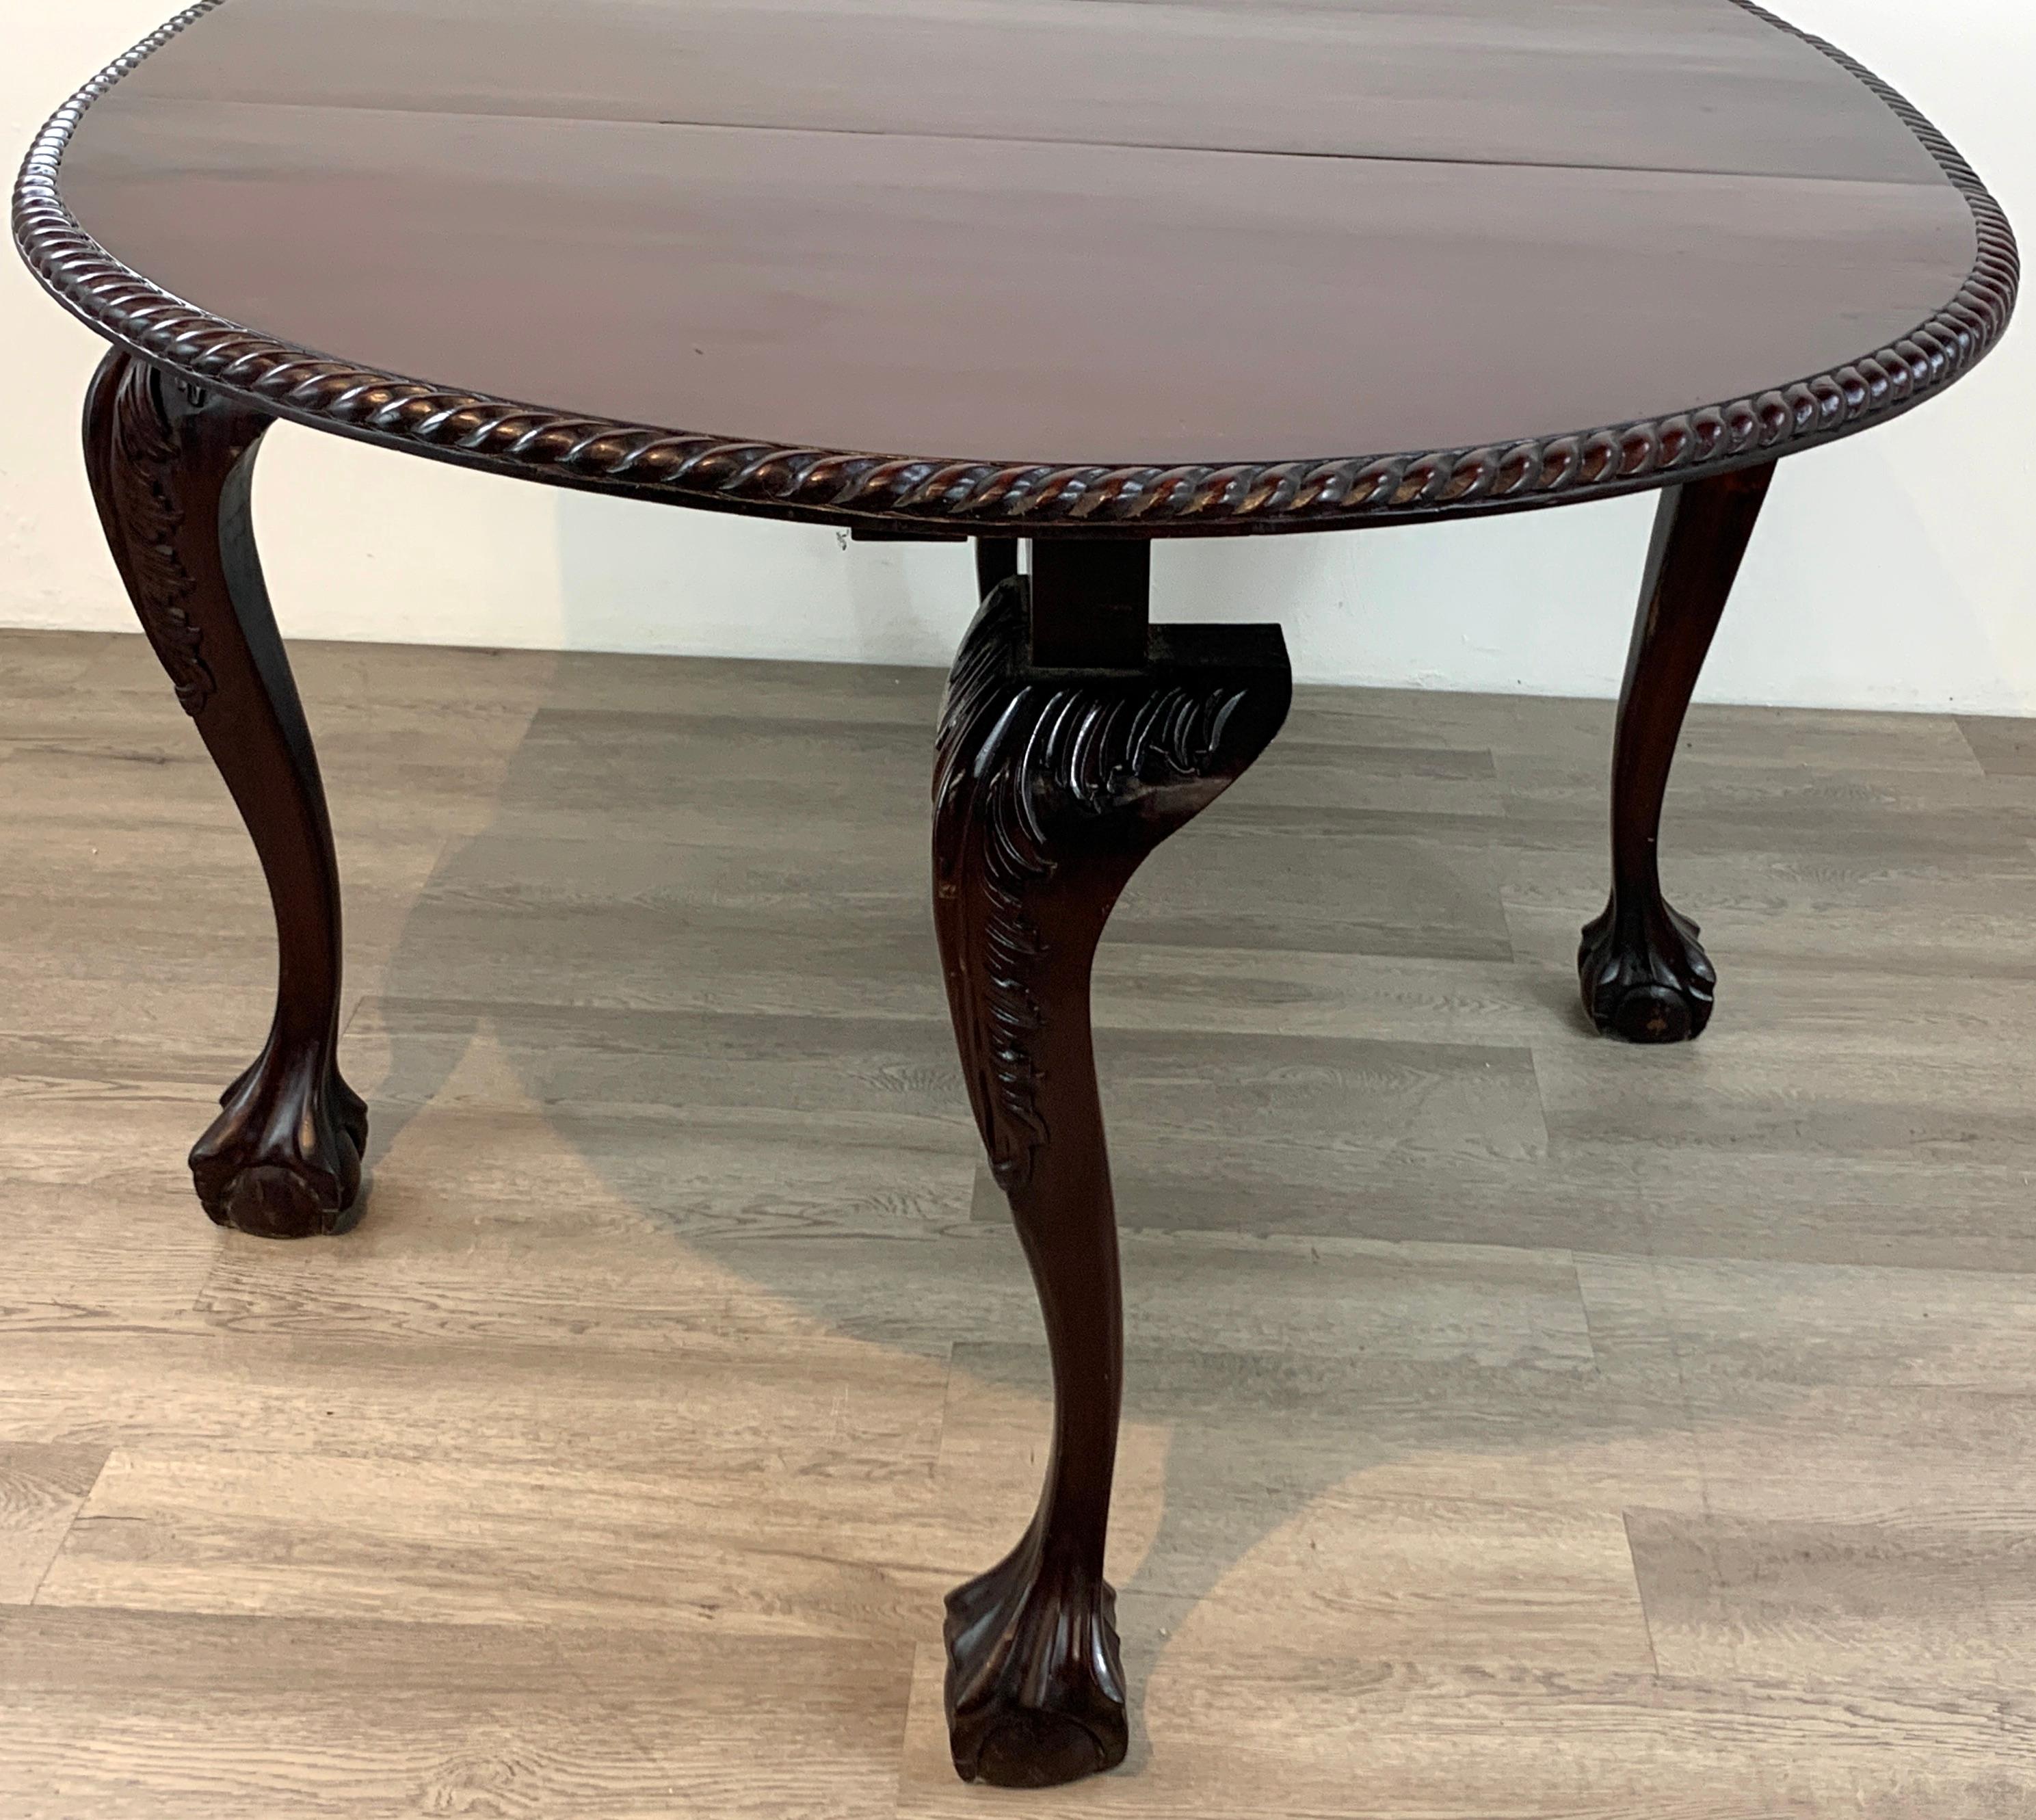 19th Century English Mahogany Ball & Claw Foot Tuck Away Dining Room Table For Sale 7